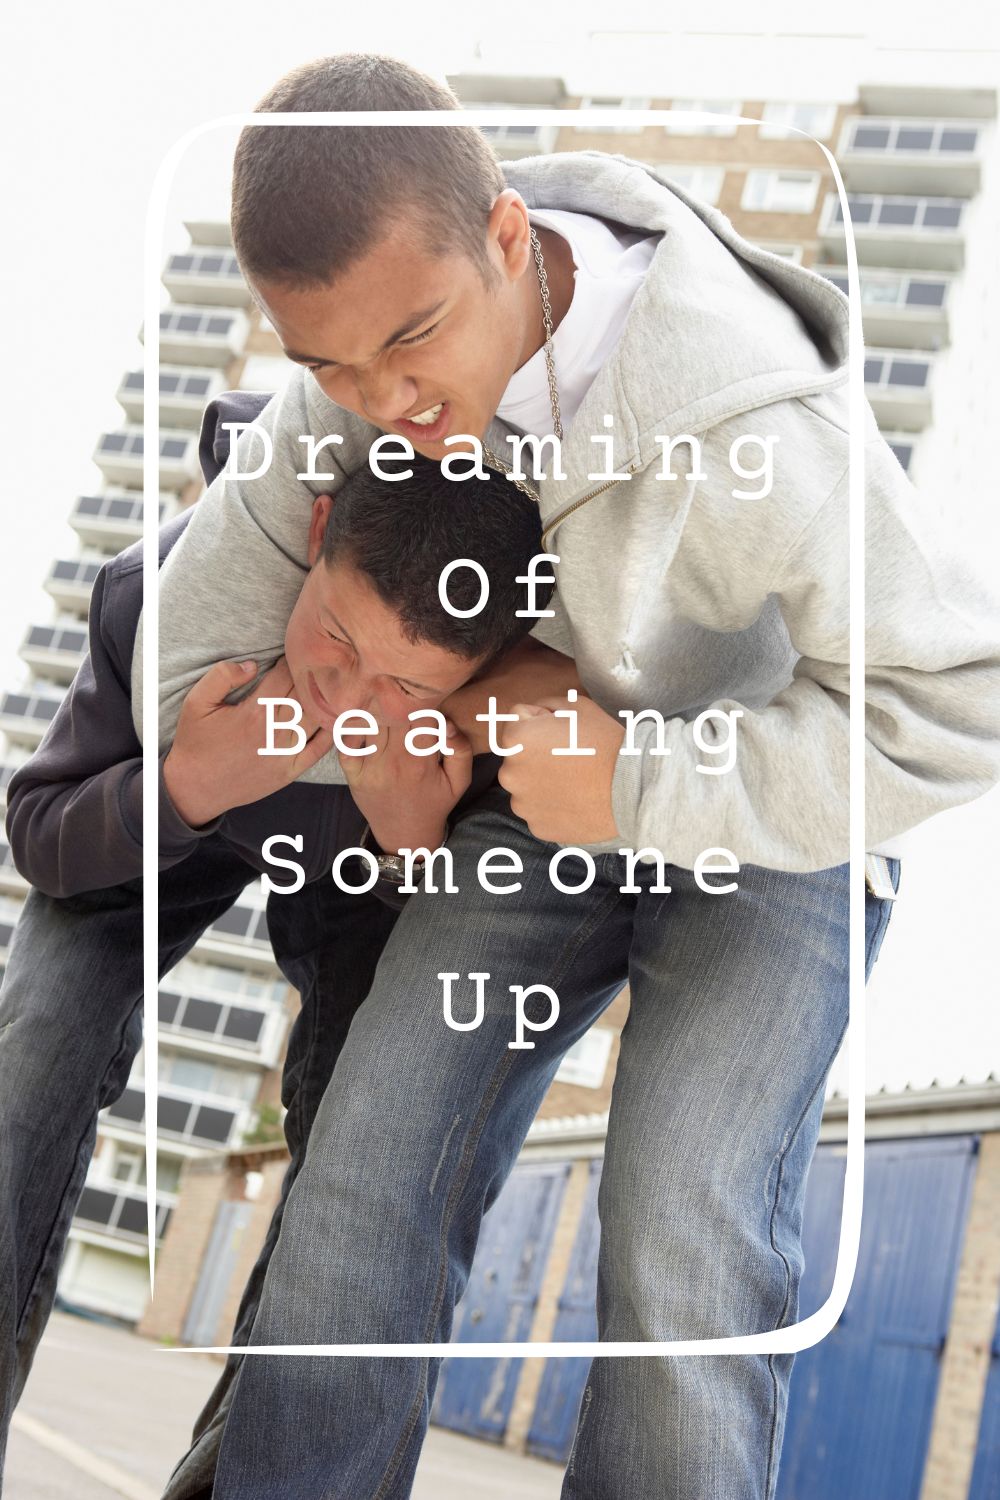 10 Dreaming Of Beating Someone Up Meanings1